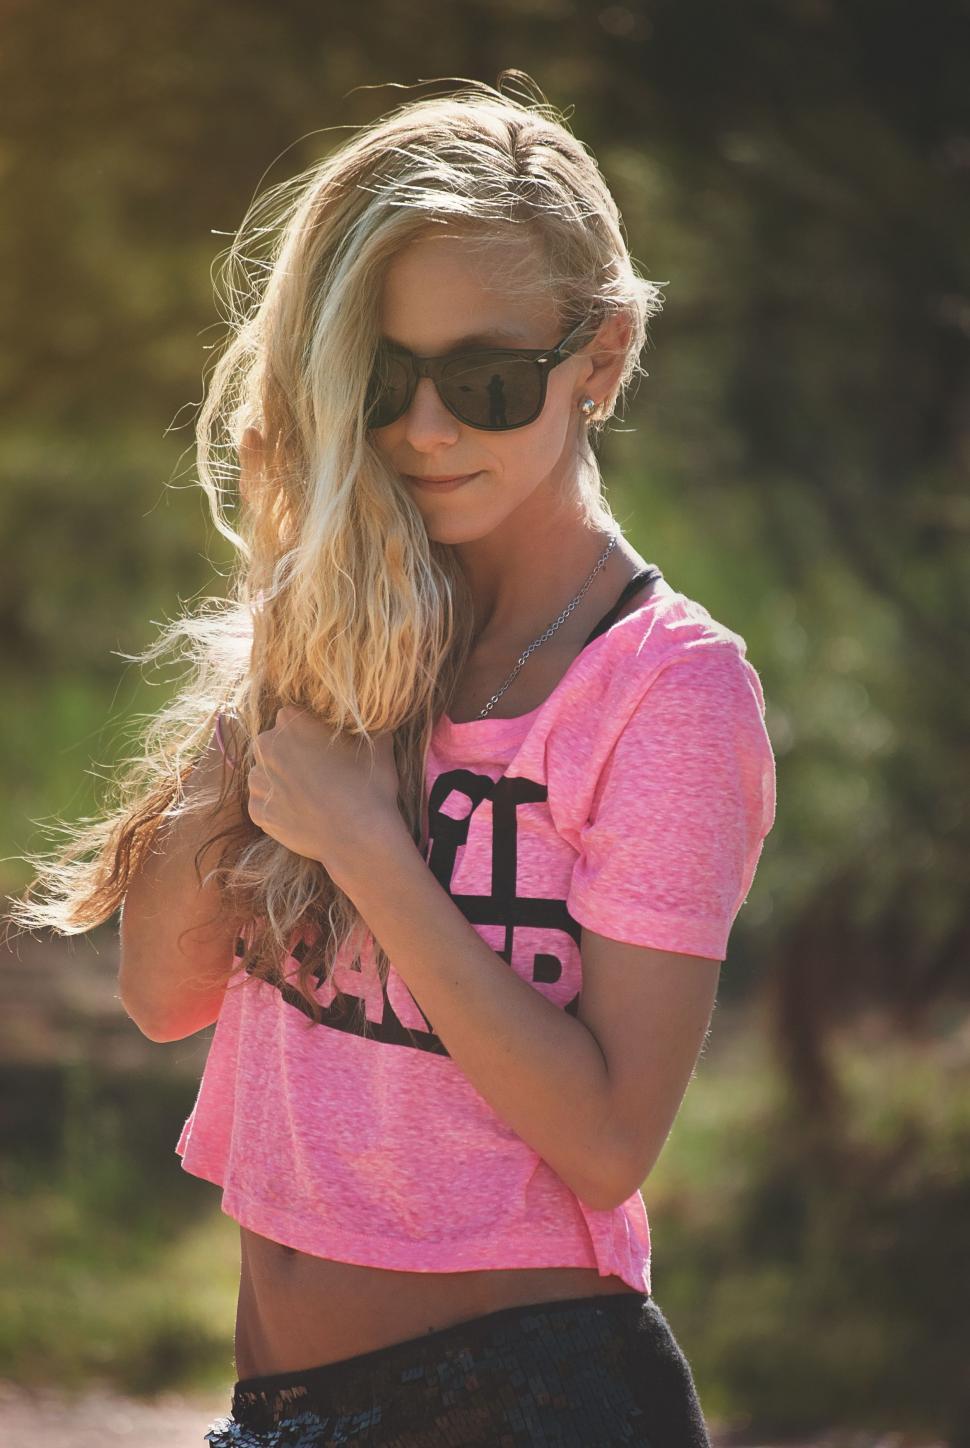 Download Free Stock Photo of Young Blonde Woman in Pink Top  